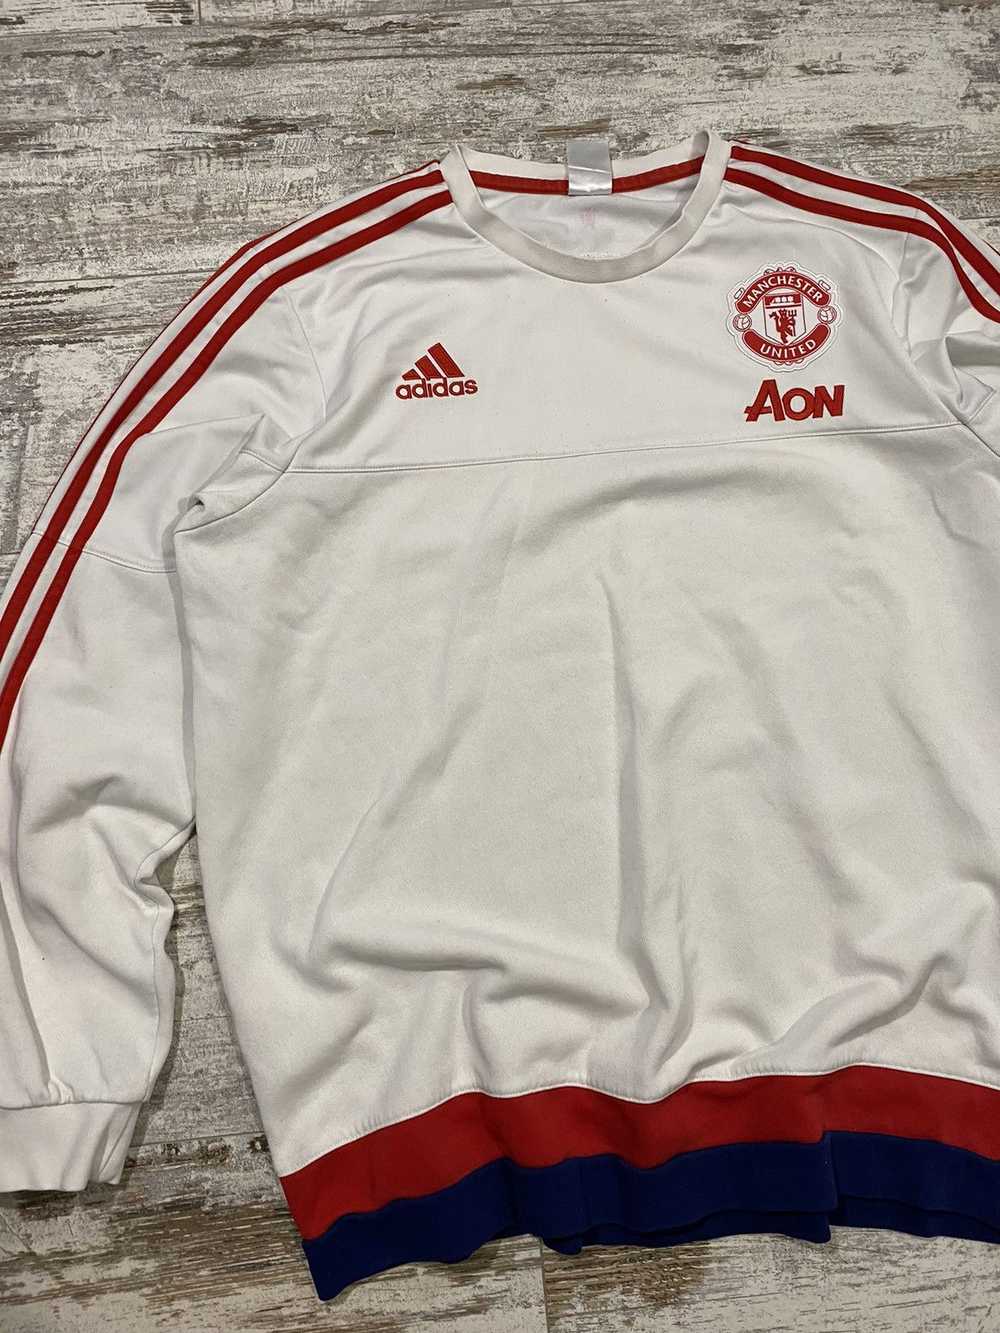 Adidas × Manchester United × Soccer Jersey VINTAG… - image 3